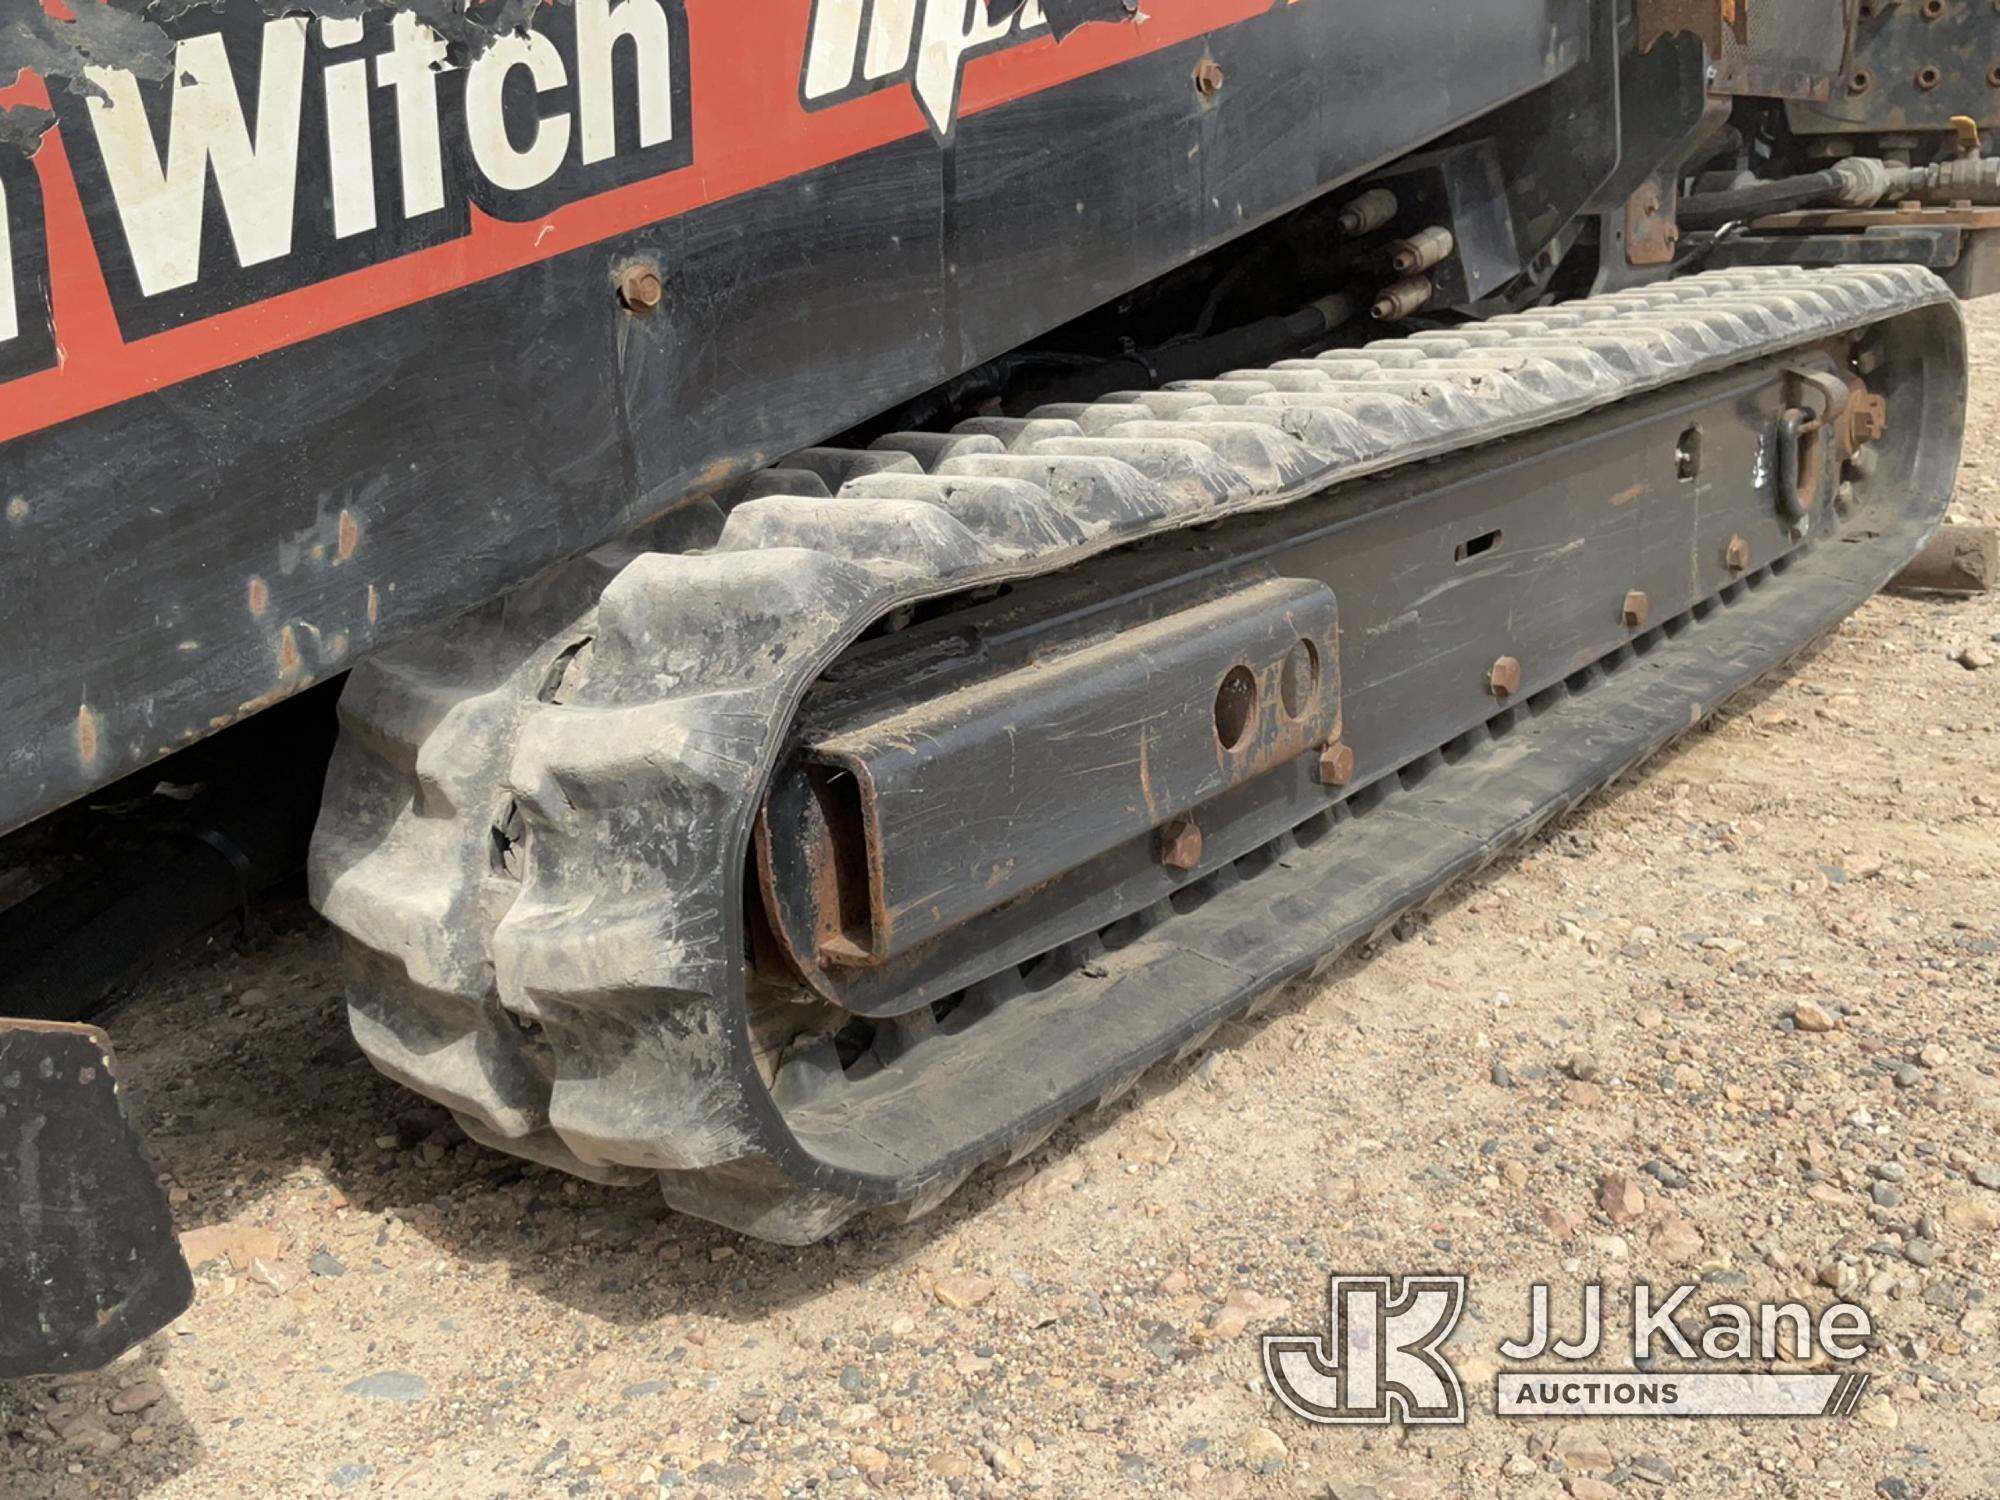 (Shakopee, MN) 2017 Ditch Witch JT10 Directional Boring Machine Runs, Moves and Operates